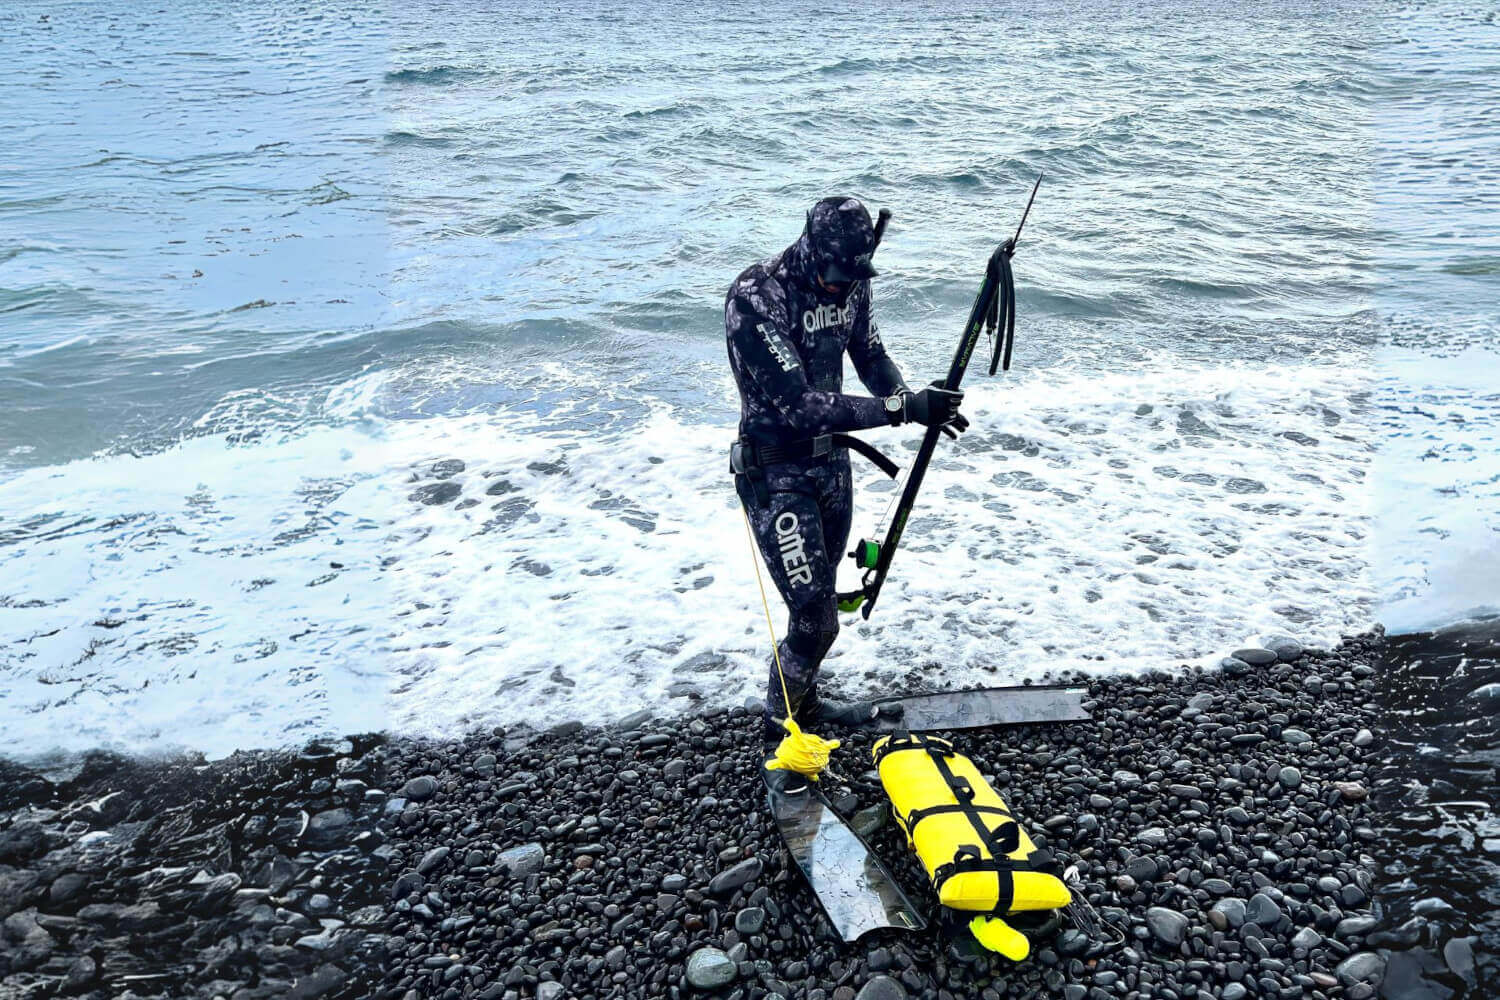 Spearfishing Alone: Risks, Rewards & Recommendations